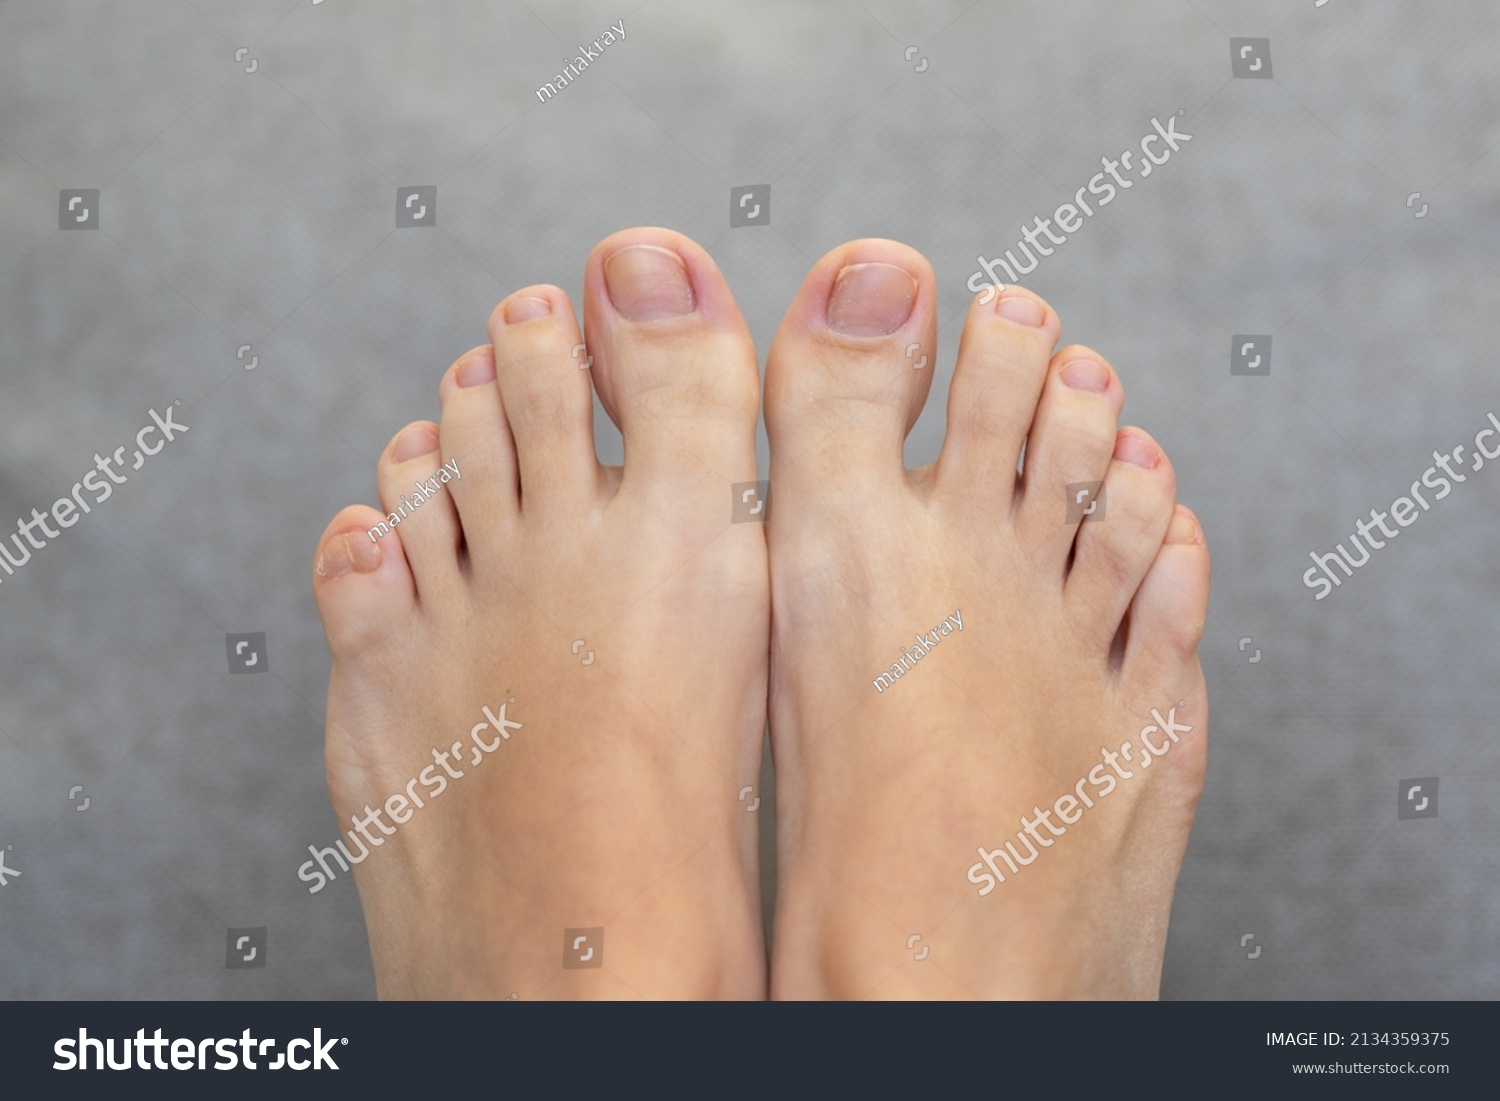 Closeup of female feet and toes on white background. Healthy feet concept #2134359375